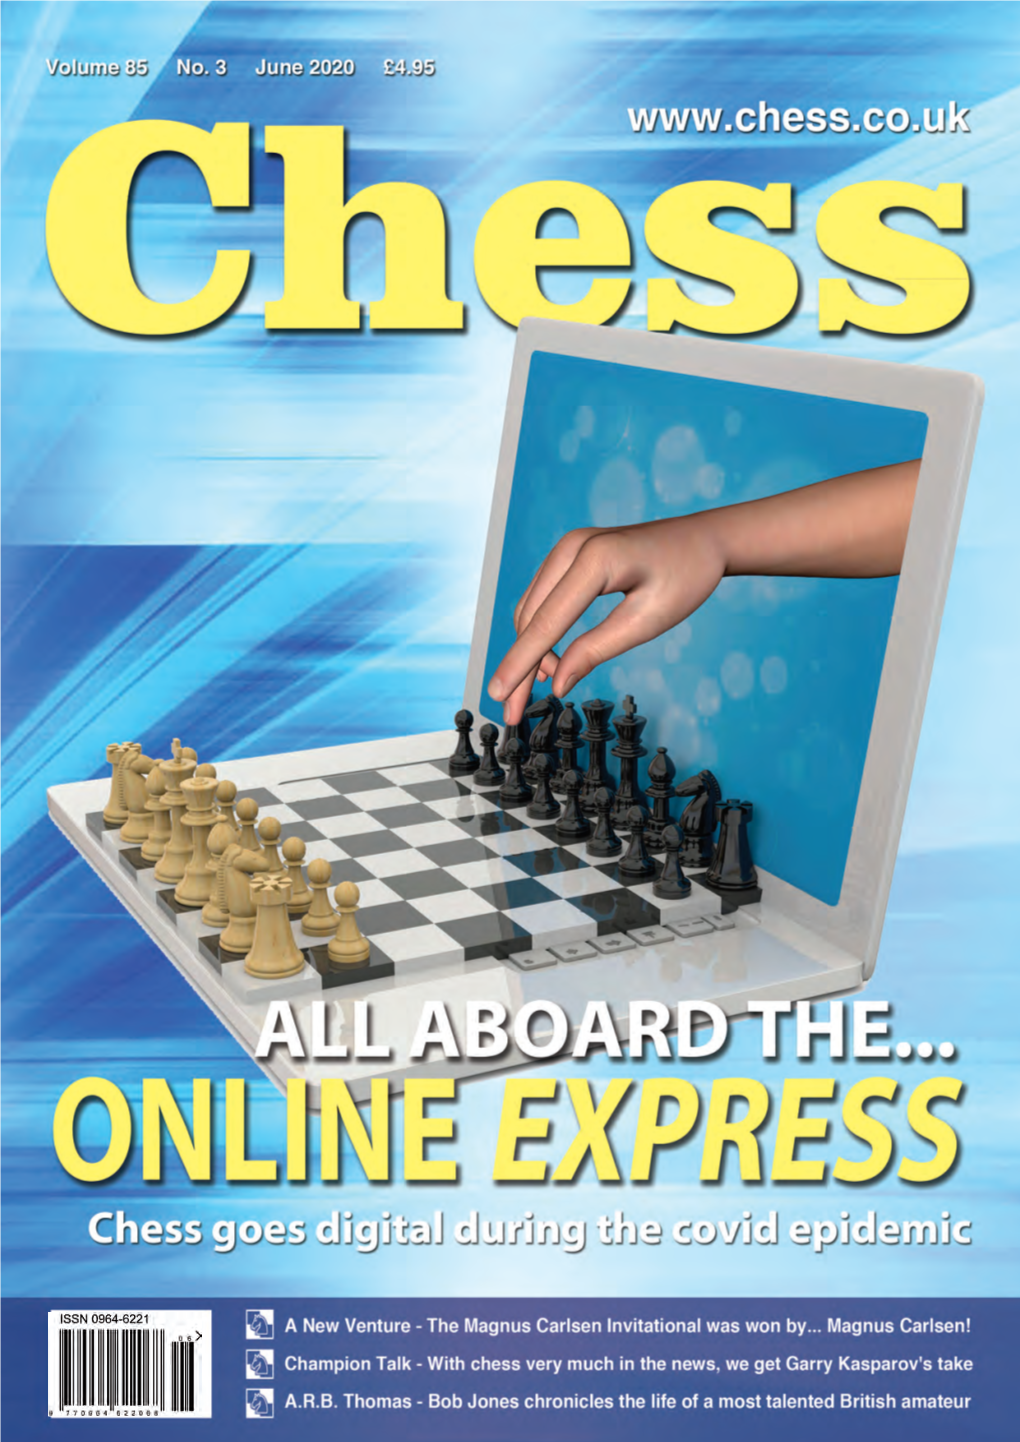 Chess Mag - 21 6 10 19/05/2020 13:11 Page 3